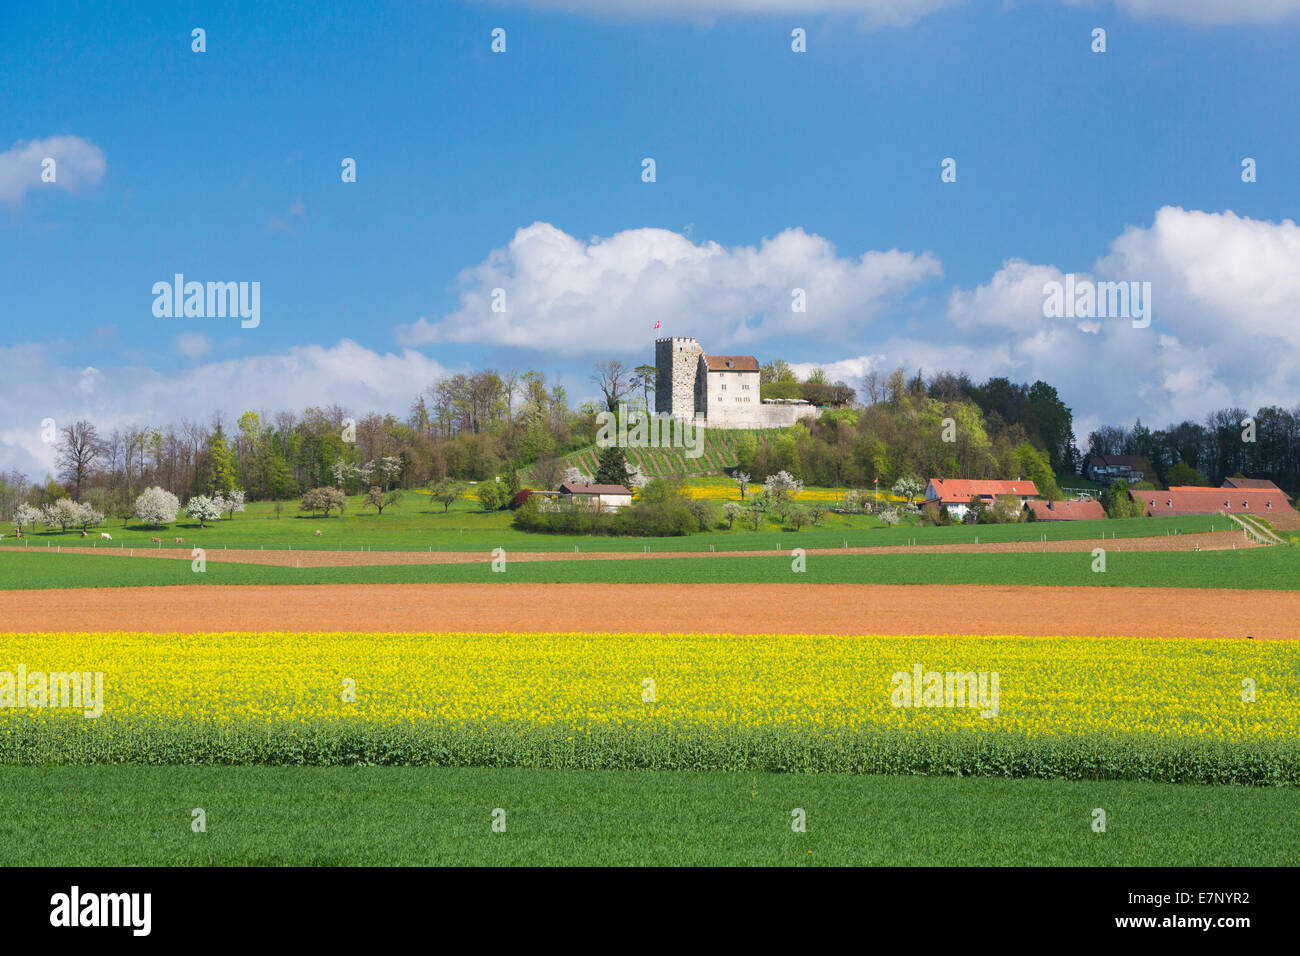 Castle, Habsburg, spring, canton, AG, Aargau, scenery, landscape, agriculture, Switzerland, Europe, Stock Photo